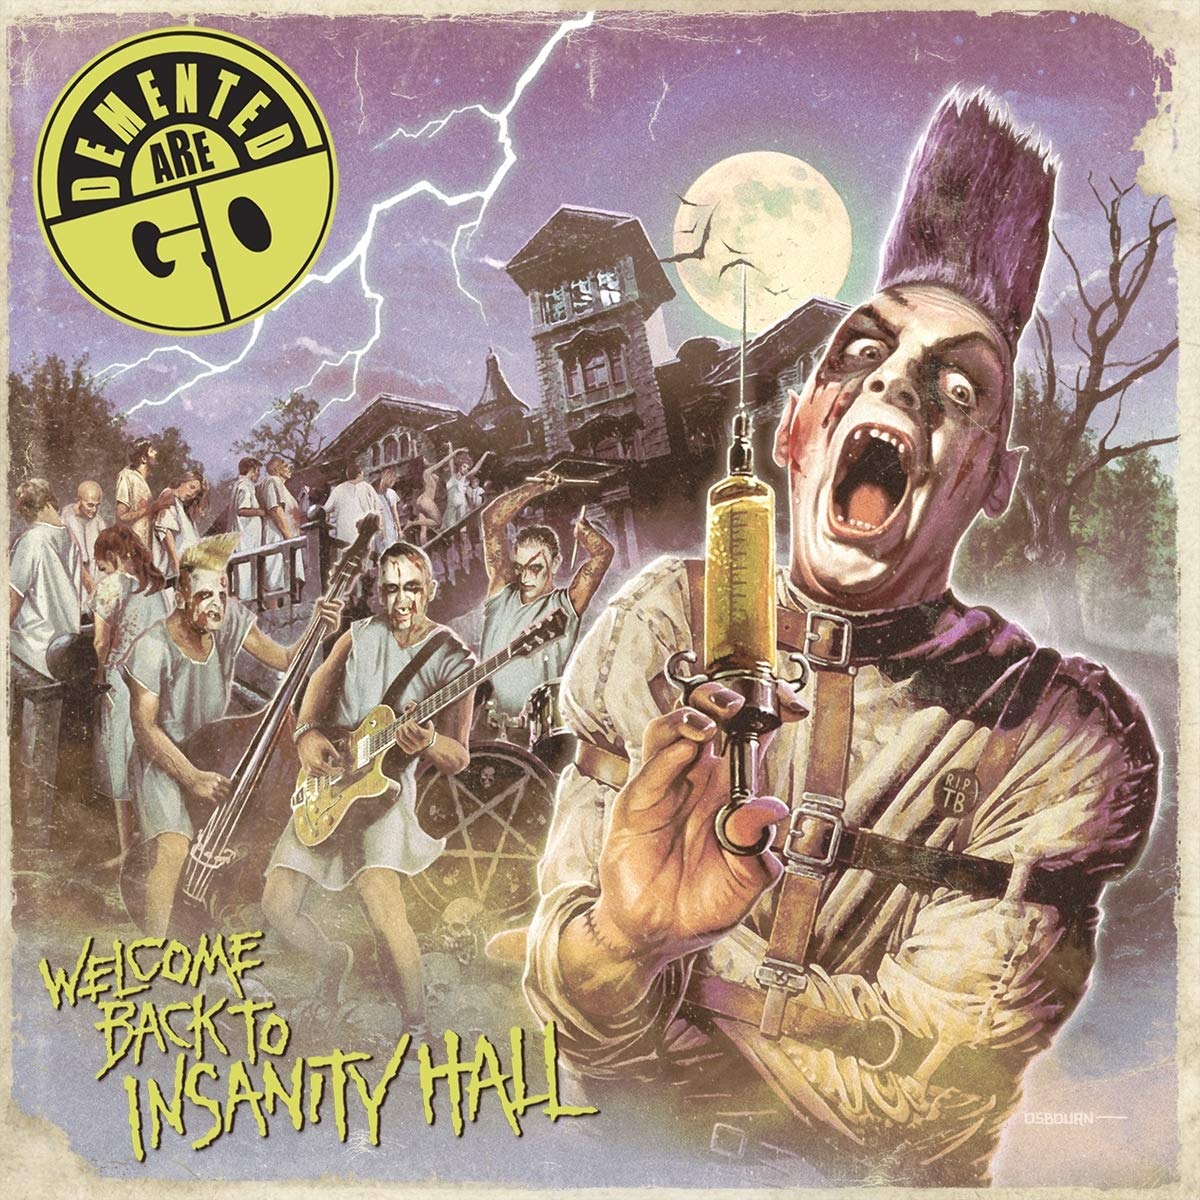 Demented Are Go - Welcome Back To Insanity Hall (Purple/Bone Swirl) - LP